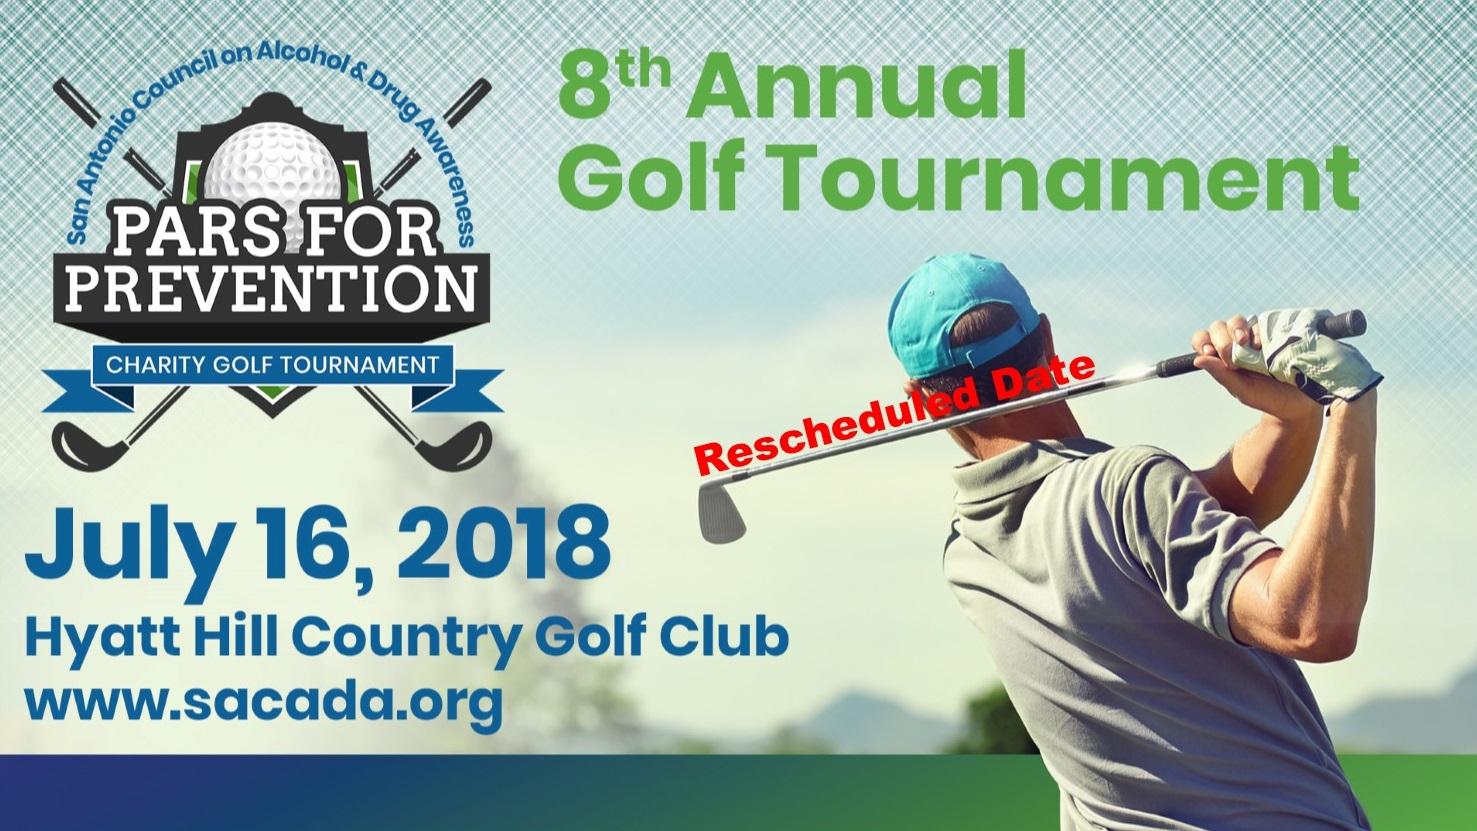 Pars for Prevention Charity Golf Tournament - RESCHEDULED DATE